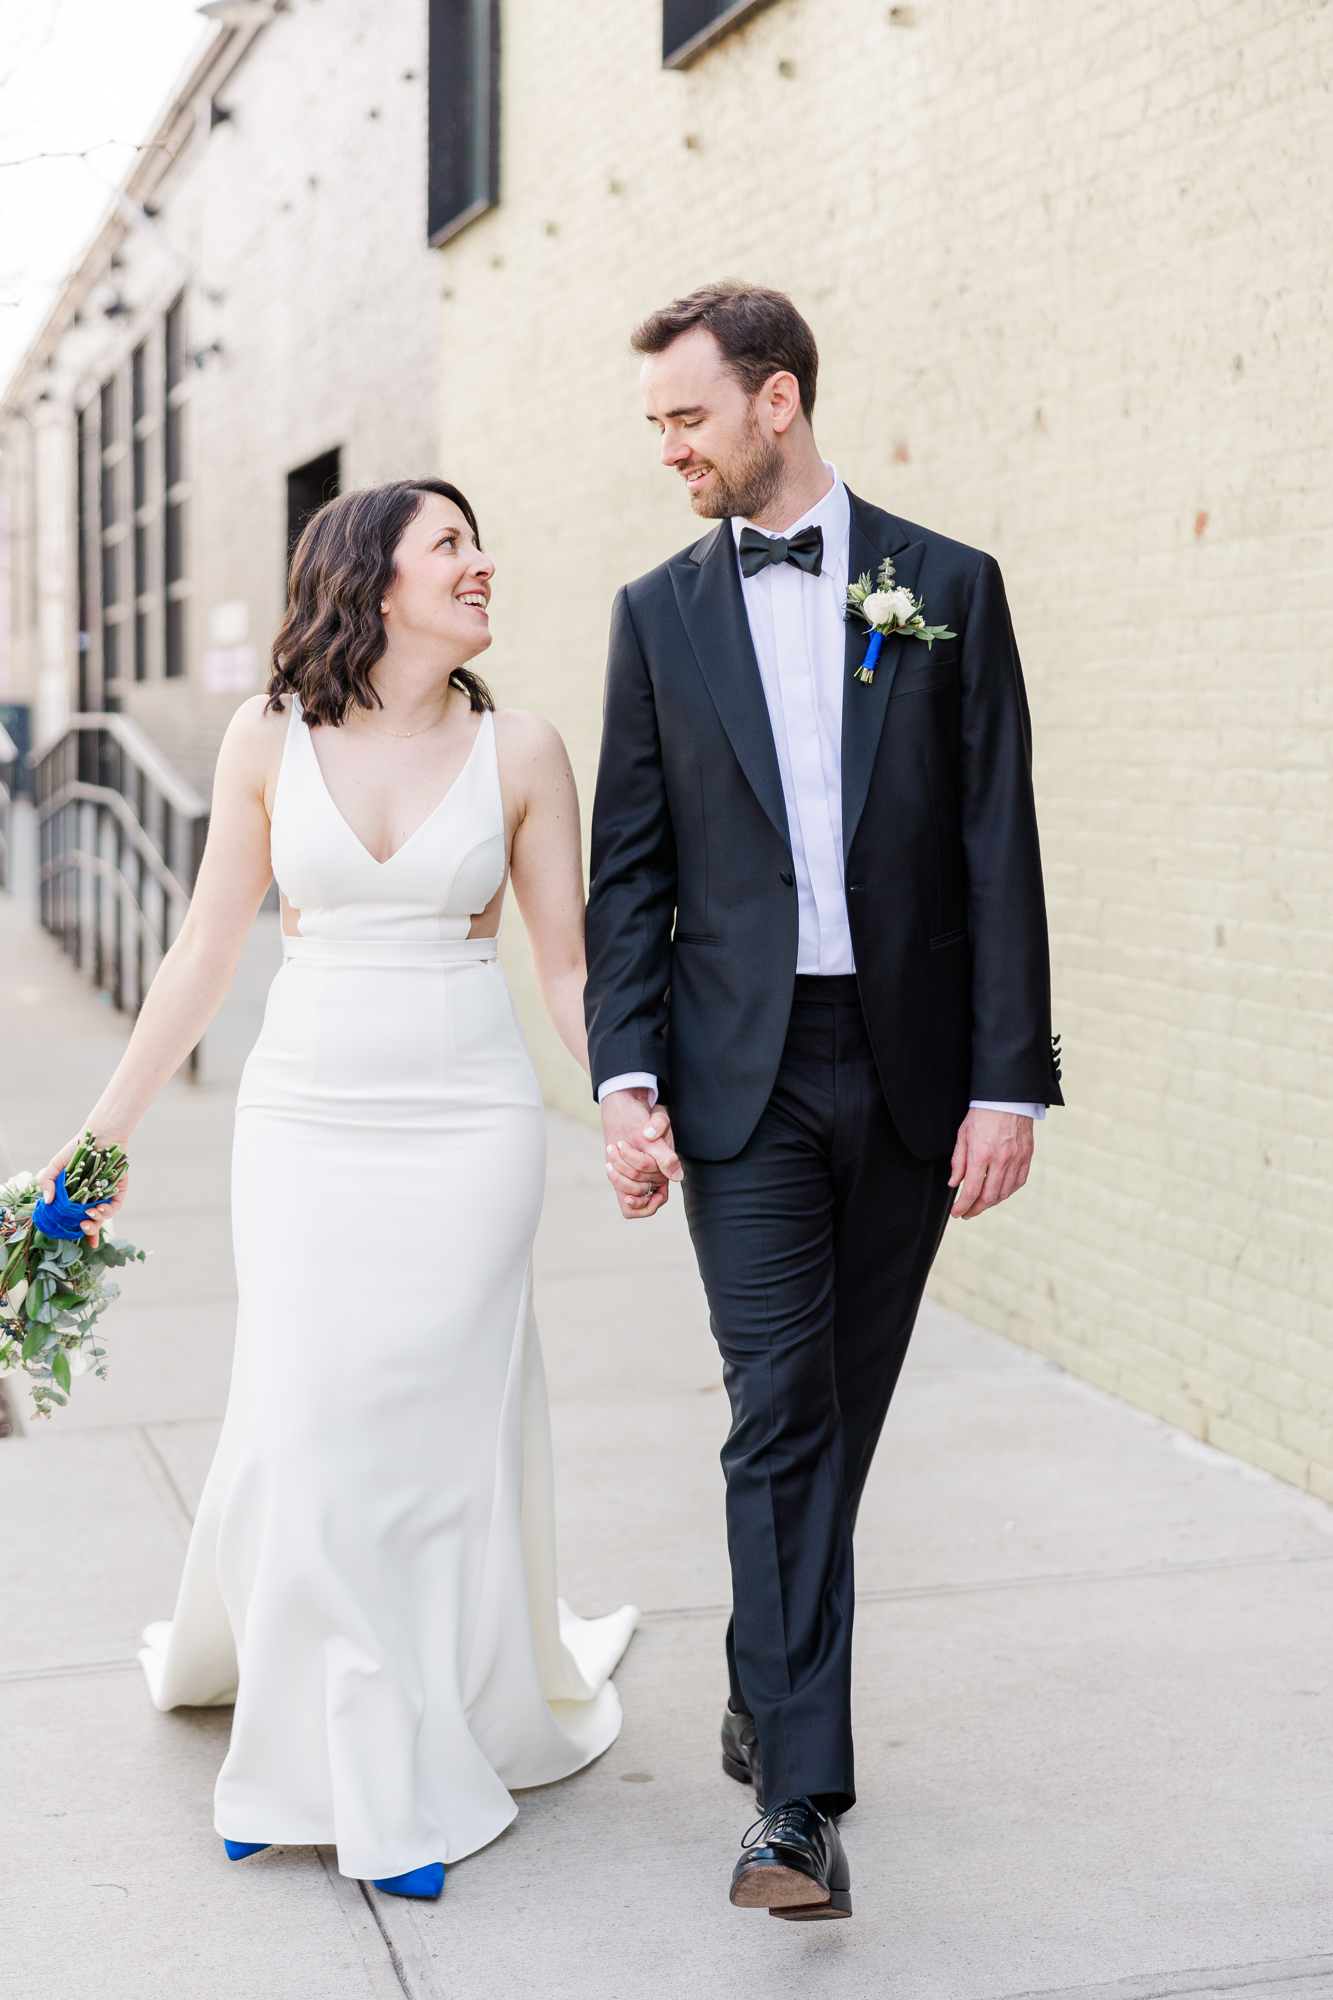 Fashionable Spring Wedding Photos at The Green Building in Brooklyn NY